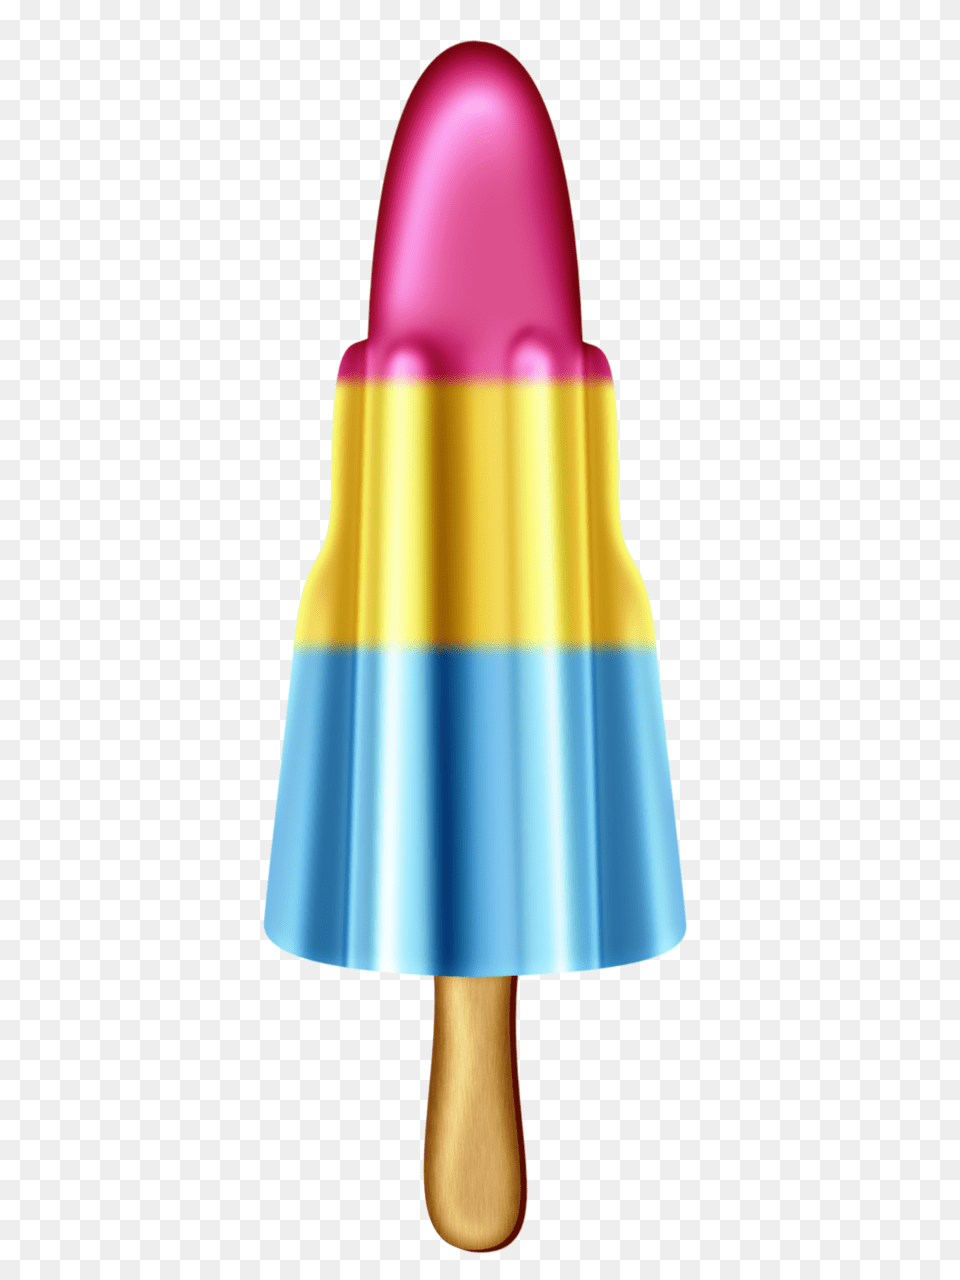 Pp Ice, Food, Ice Pop, Smoke Pipe Png